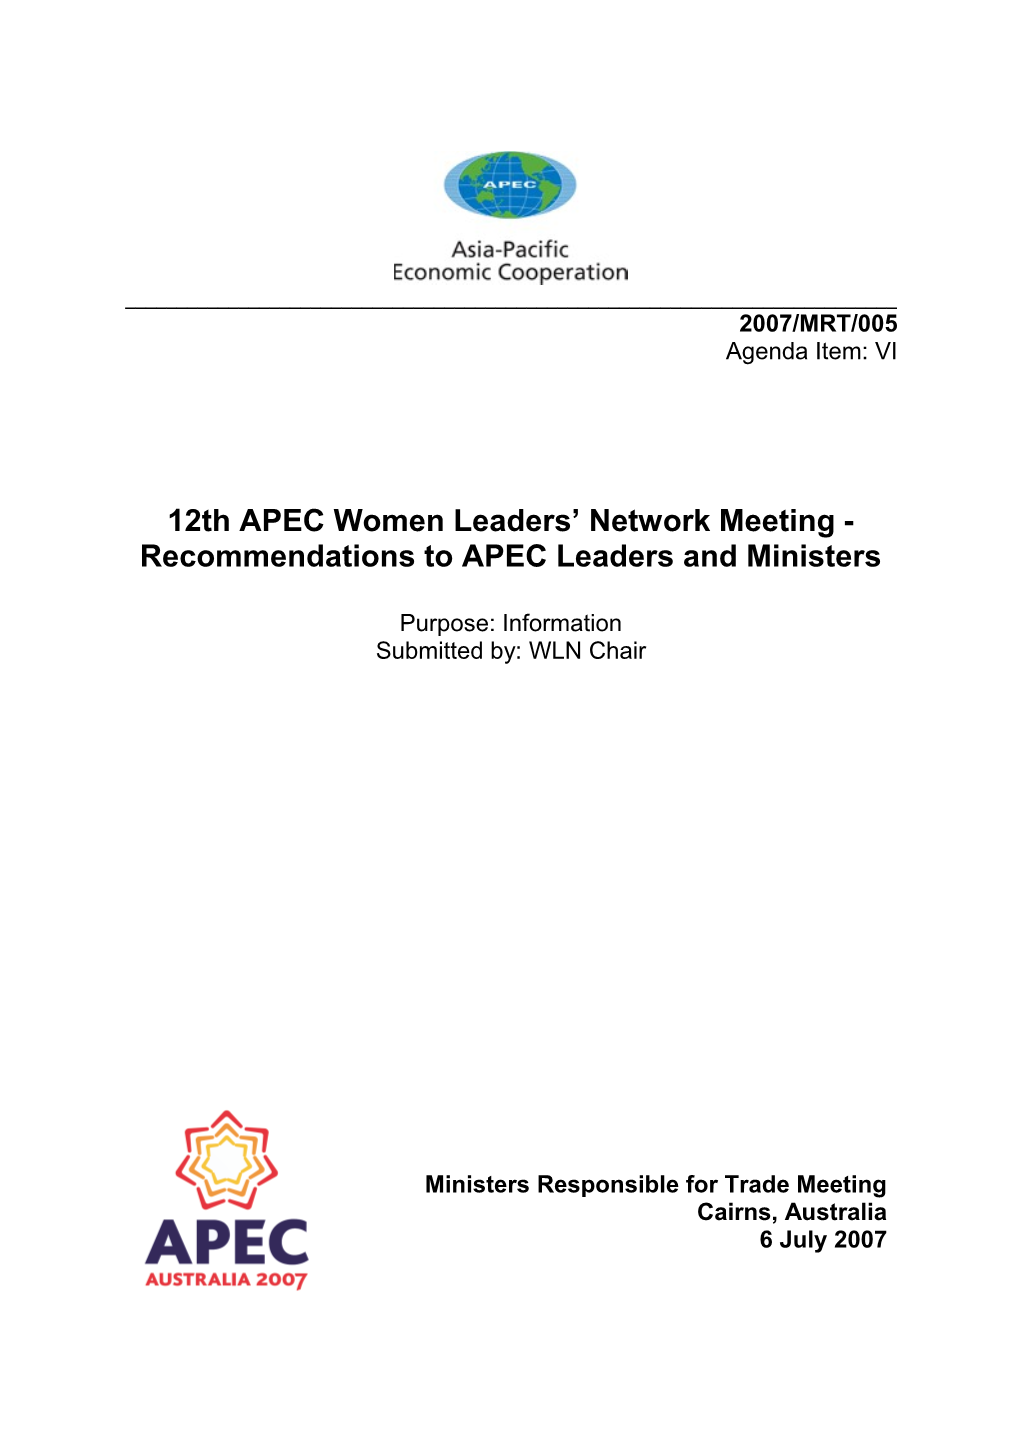 12Th APEC Women Leaders Network Recommendations to APEC Leaders and Ministers